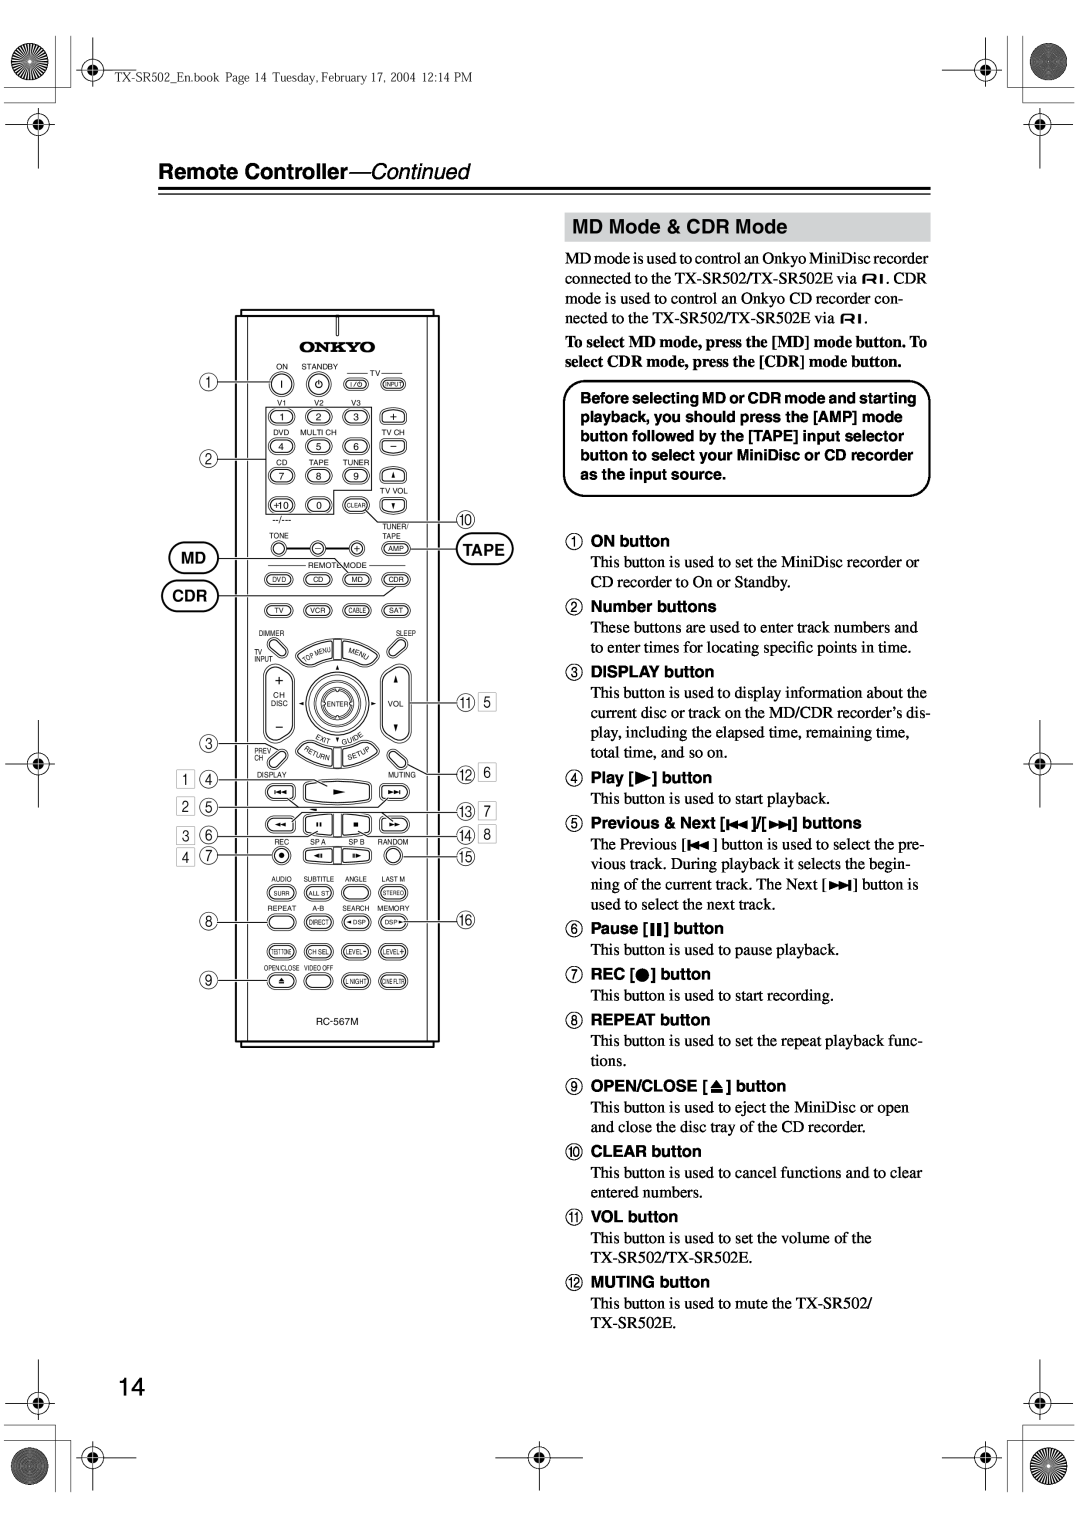 Onkyo TX-SR502E instruction manual MD Mode & CDR Mode, Remote Controller-Continued 